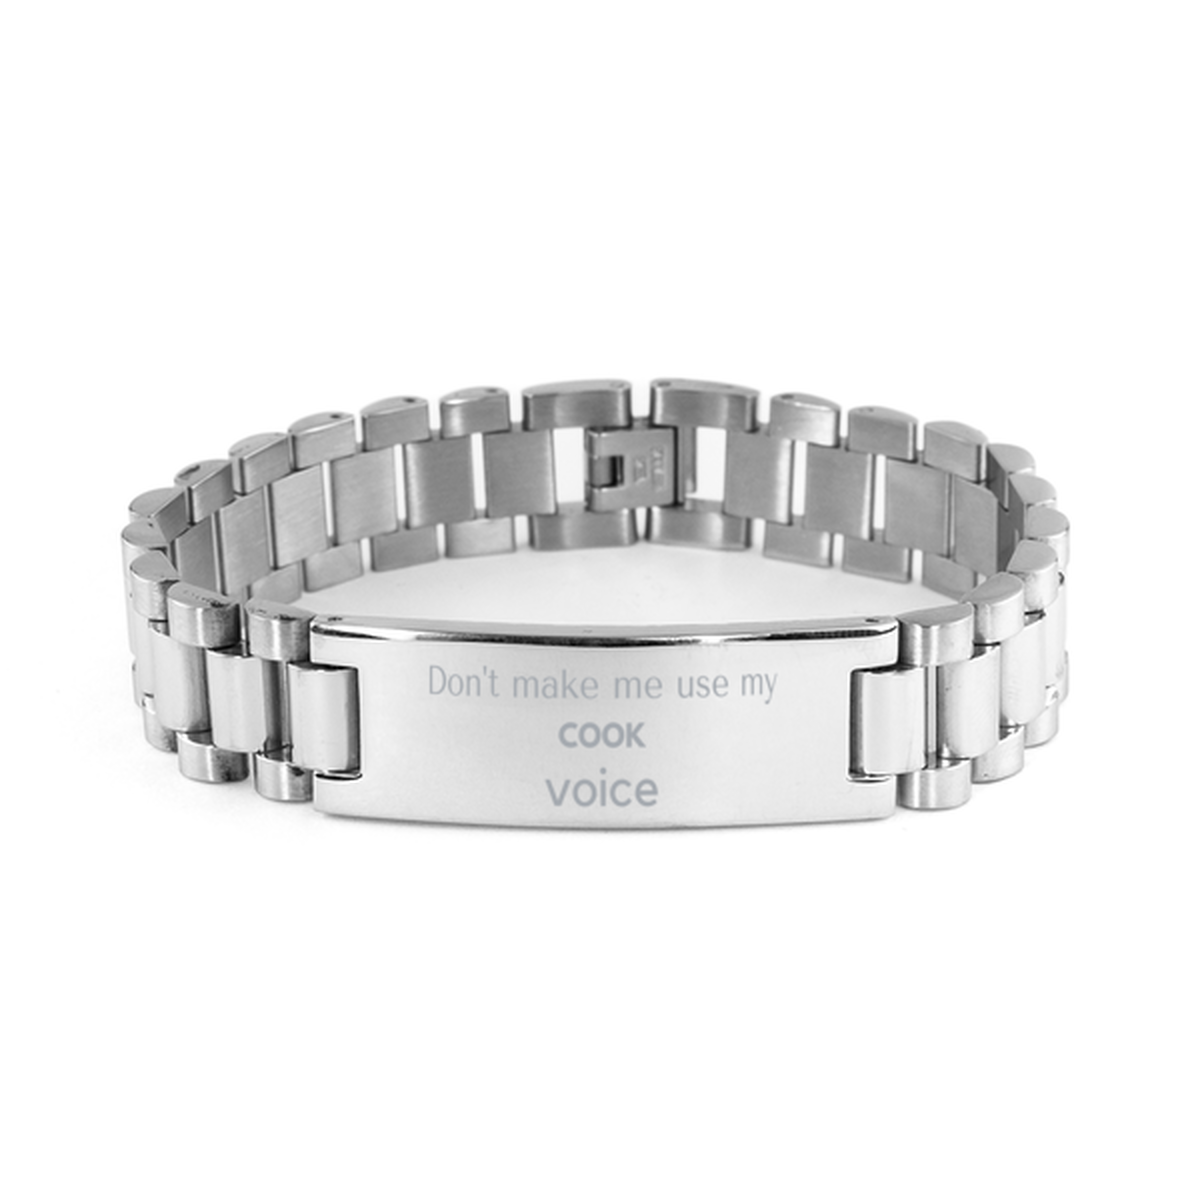 Don't make me use my Cook voice, Sarcasm Cook Gifts, Christmas Cook Ladder Stainless Steel Bracelet Birthday Unique Gifts For Cook Coworkers, Men, Women, Colleague, Friends